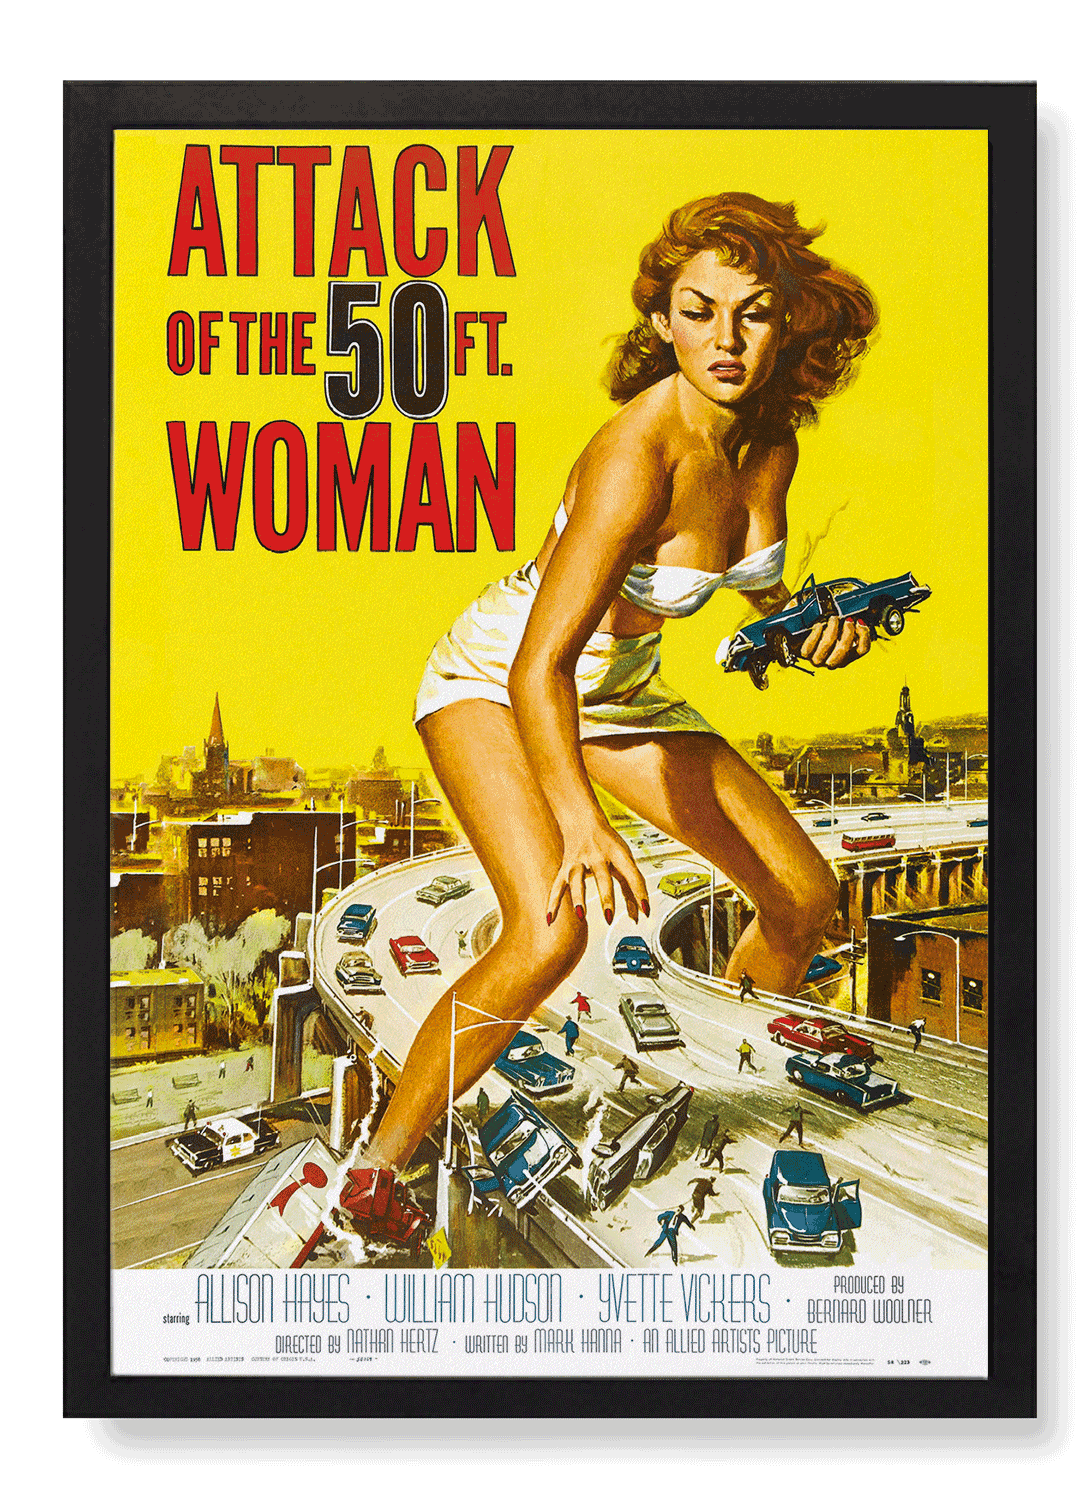 ATTACK OF THE 50 FT. WOMAN (1958)